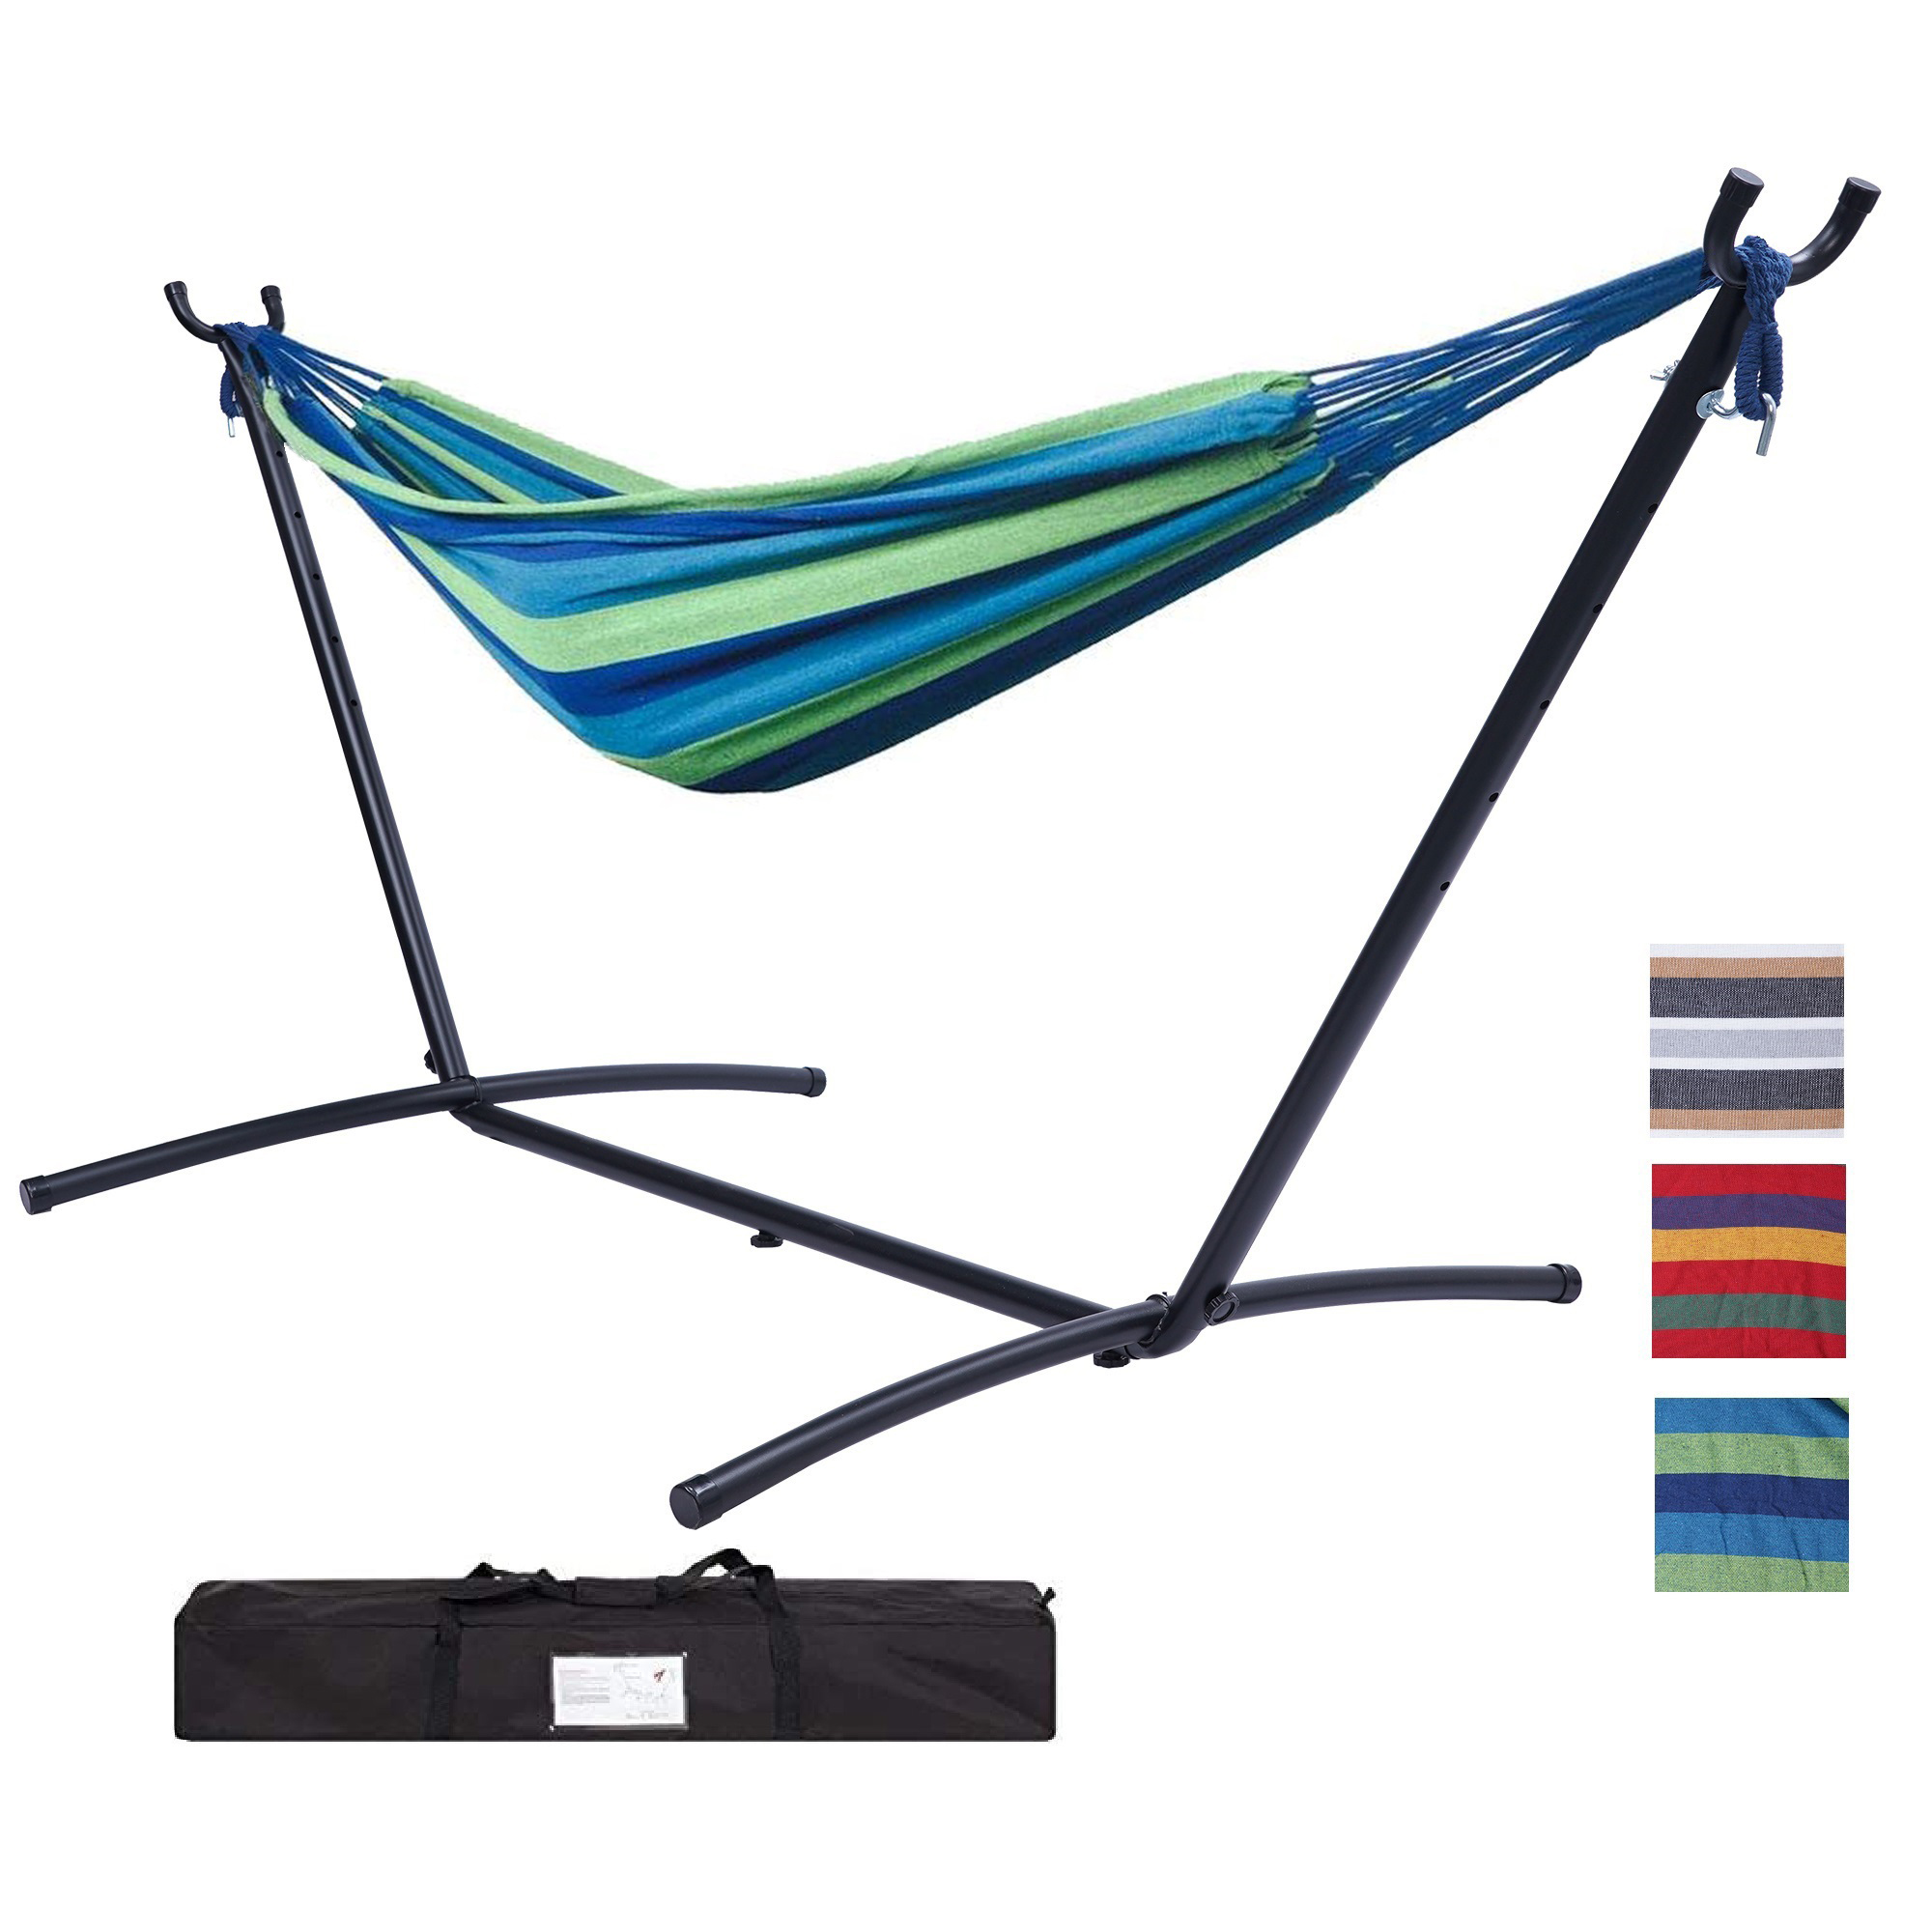 Double Classic Hammock with Stand for 2 Person- Indoor or Outdoor Use-with Carrying Pouch-Powder-coated Steel Frame - Durable 450 Pound Capacity，Blue/Green Striped-Boyel Living